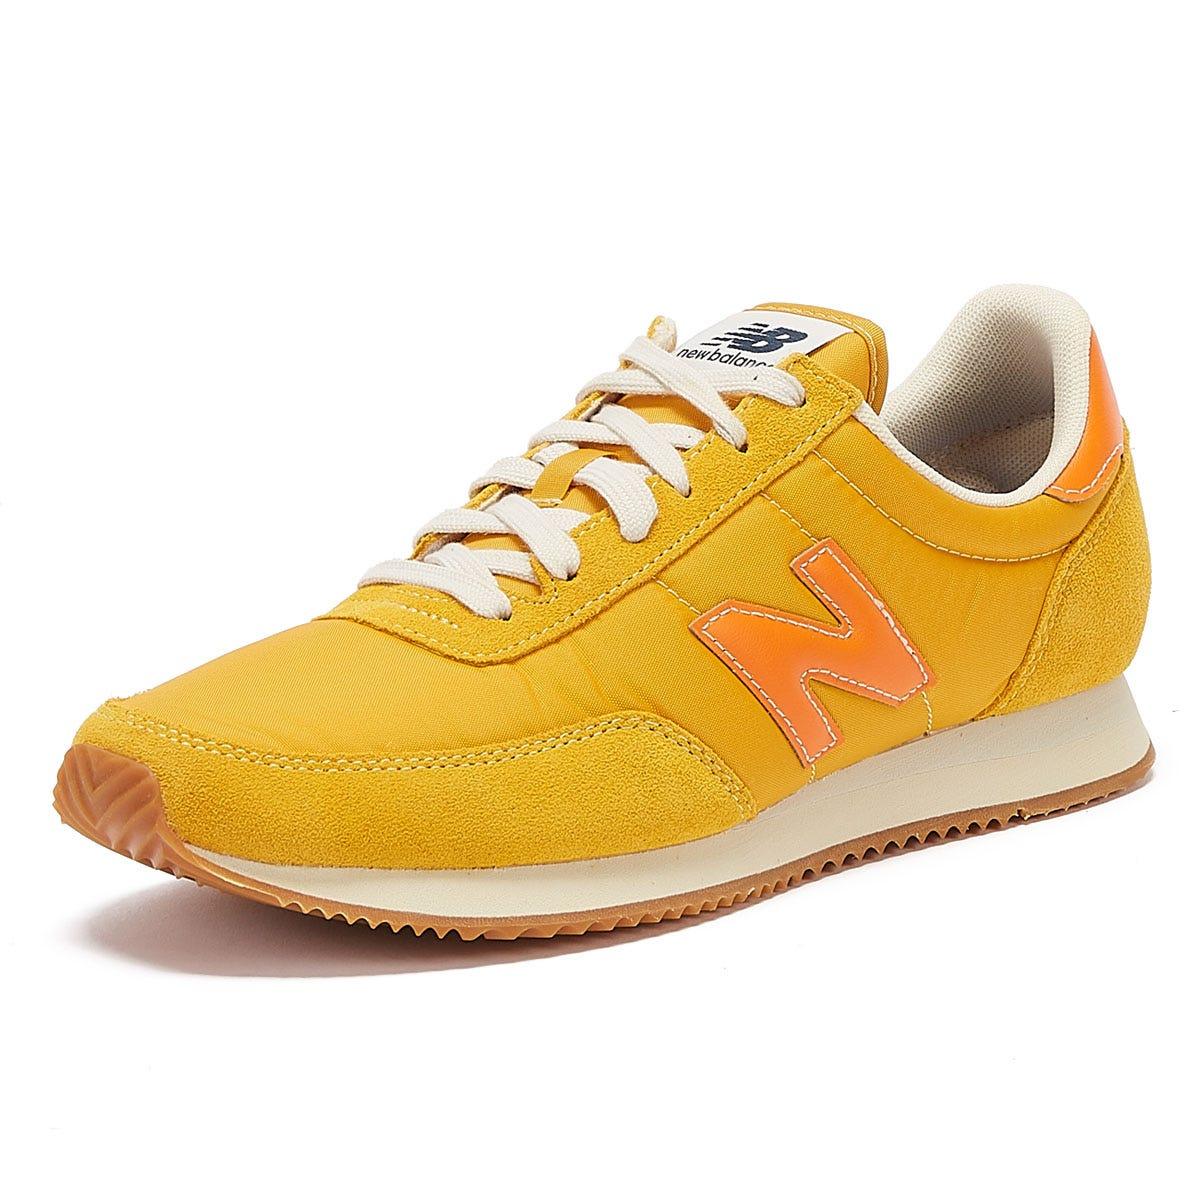 New Balance Suede 720 in Yellow for Men - Lyst